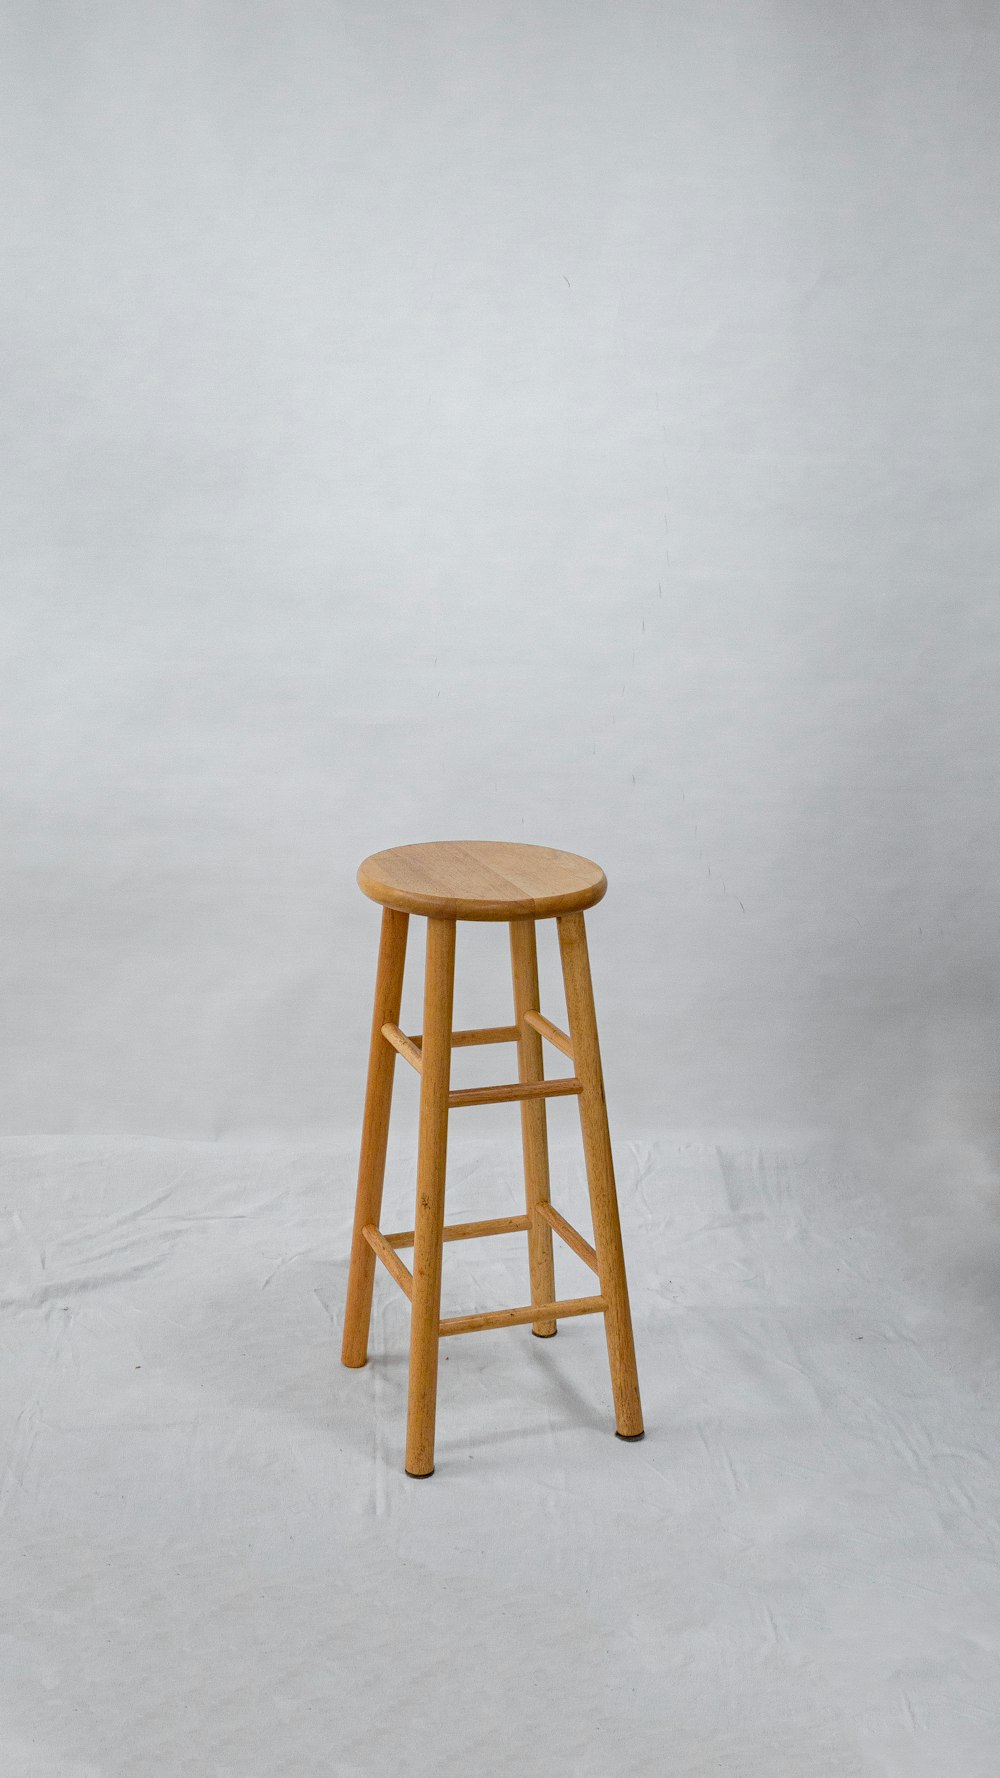 a wooden stool sitting on top of a white floor